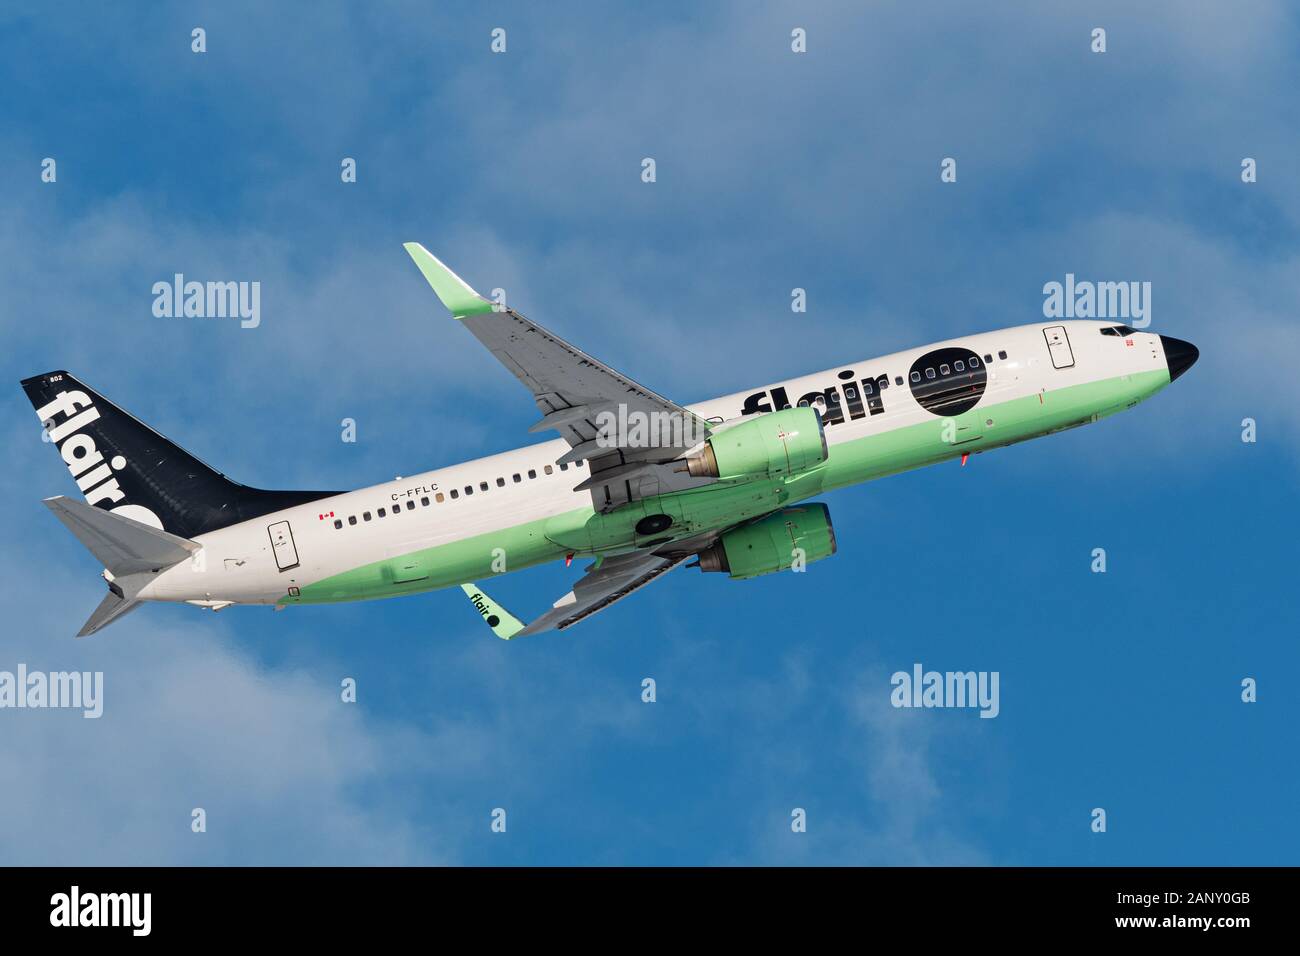 Flair Airlines plane Boeing 737 (737-800) single-aisle narrow body jet airliner airborne after take-off Stock Photo